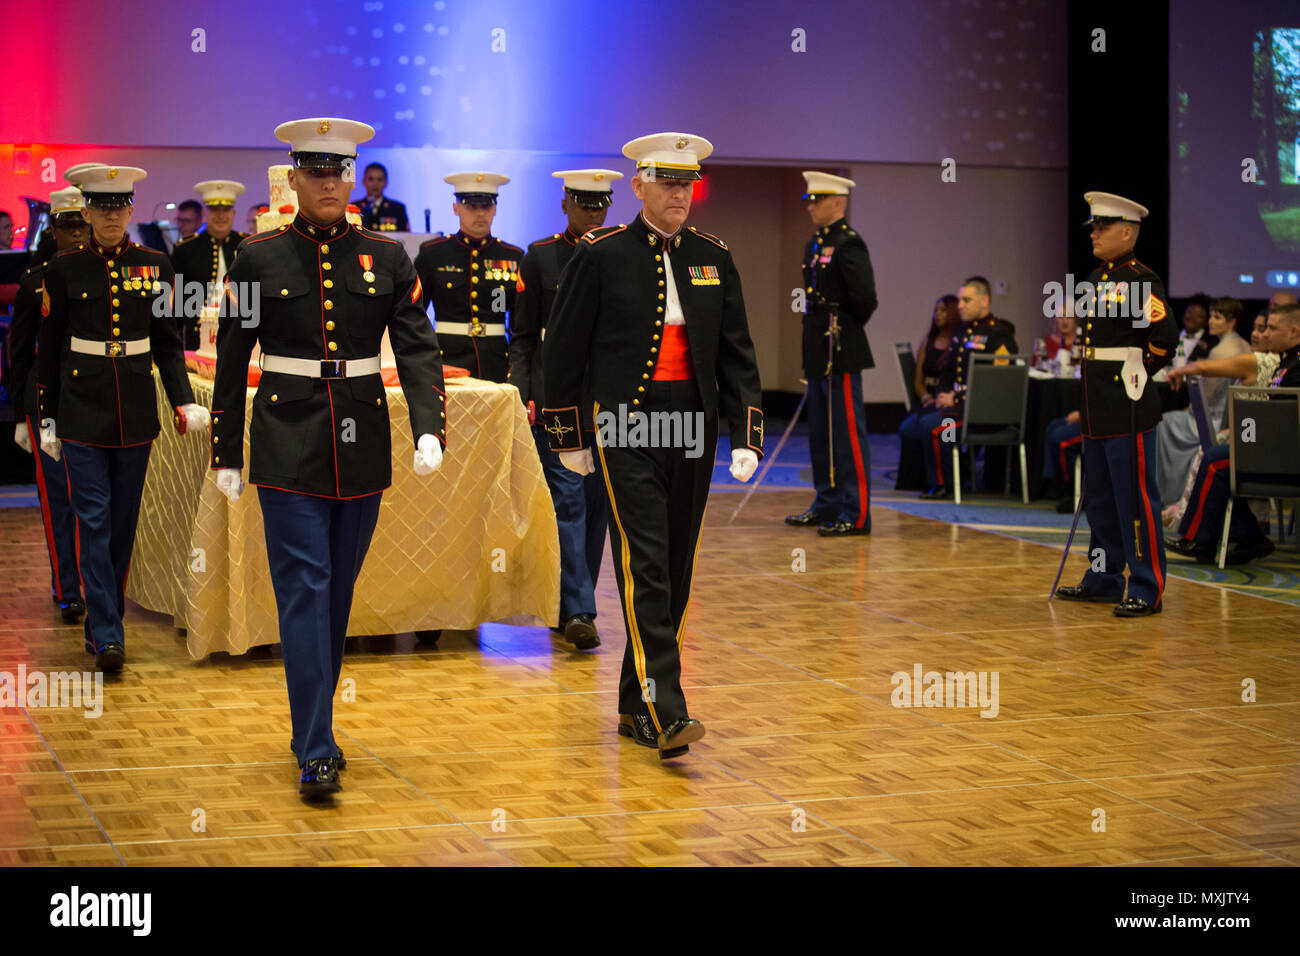 U.S. Marine Corps Chief Warrant Officer 5 Michael W. Edmonson, head of Marine Corps Field Bands, Office of United States Marine Corps Communication, and Pfc. Caleb J. Castaneda, cyber network operator, Administration and Resource Management, march off with the cake detail during the Headquarters & Service Battalion Marine Corps Ball, Renaissance Arlington Capitol View Hotel, Arlington, Va., Nov. 05, 2016. Edmonson and Castenda were recognized as the oldest and youngest Marines present during the celebration of the Marine Corps’ 241st birthday. (U.S. Marine Corps photo by Pfc. Alex A. Quiles) Stock Photo